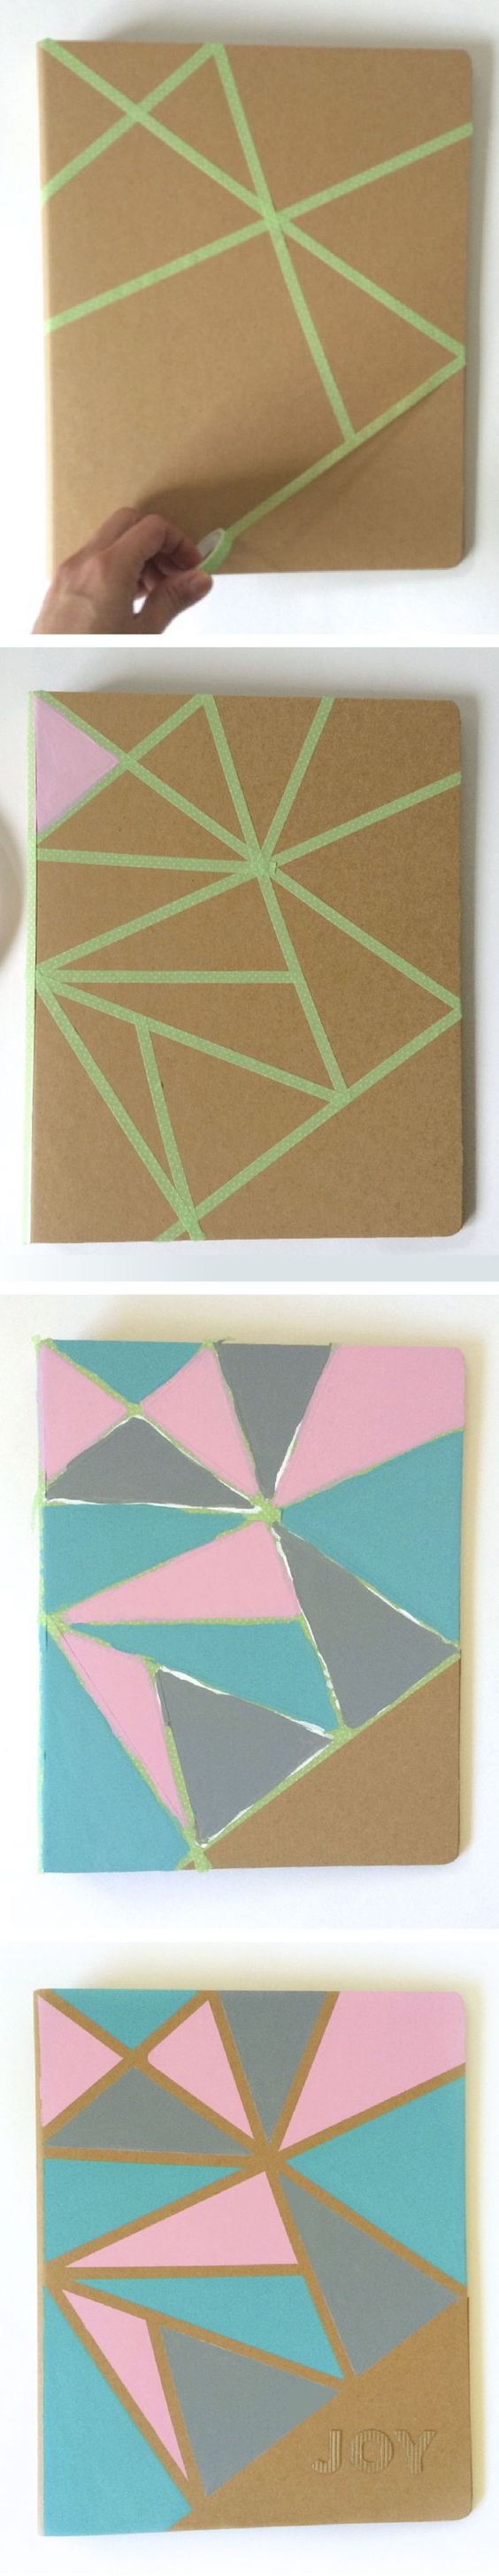 Decorate Notebooks With Washi Tape. 